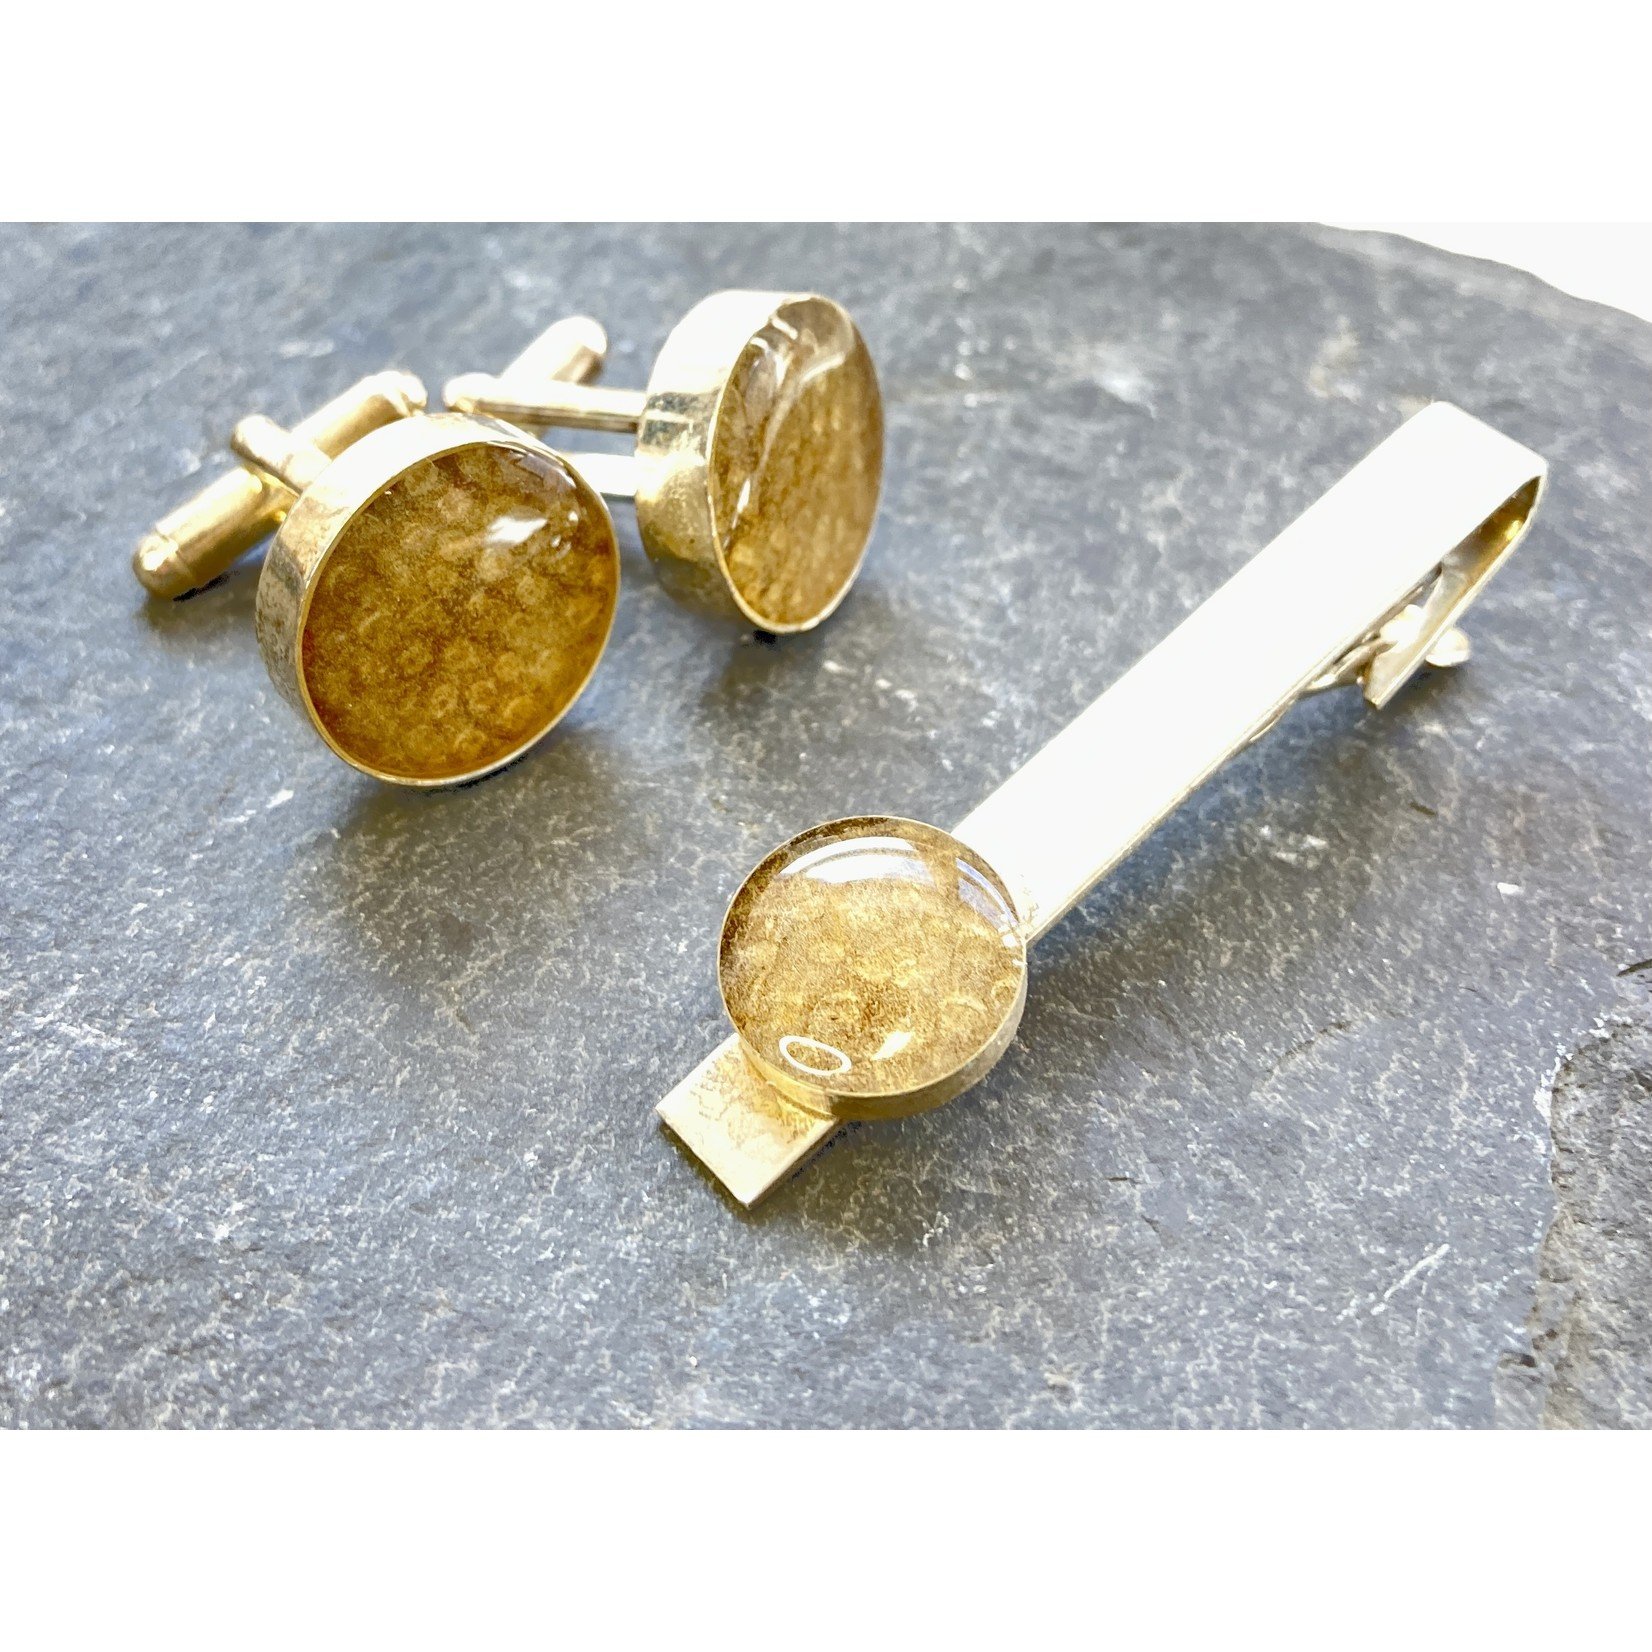 Wild by Nature Cufflinks and Tie Clip  | Wild by Nature